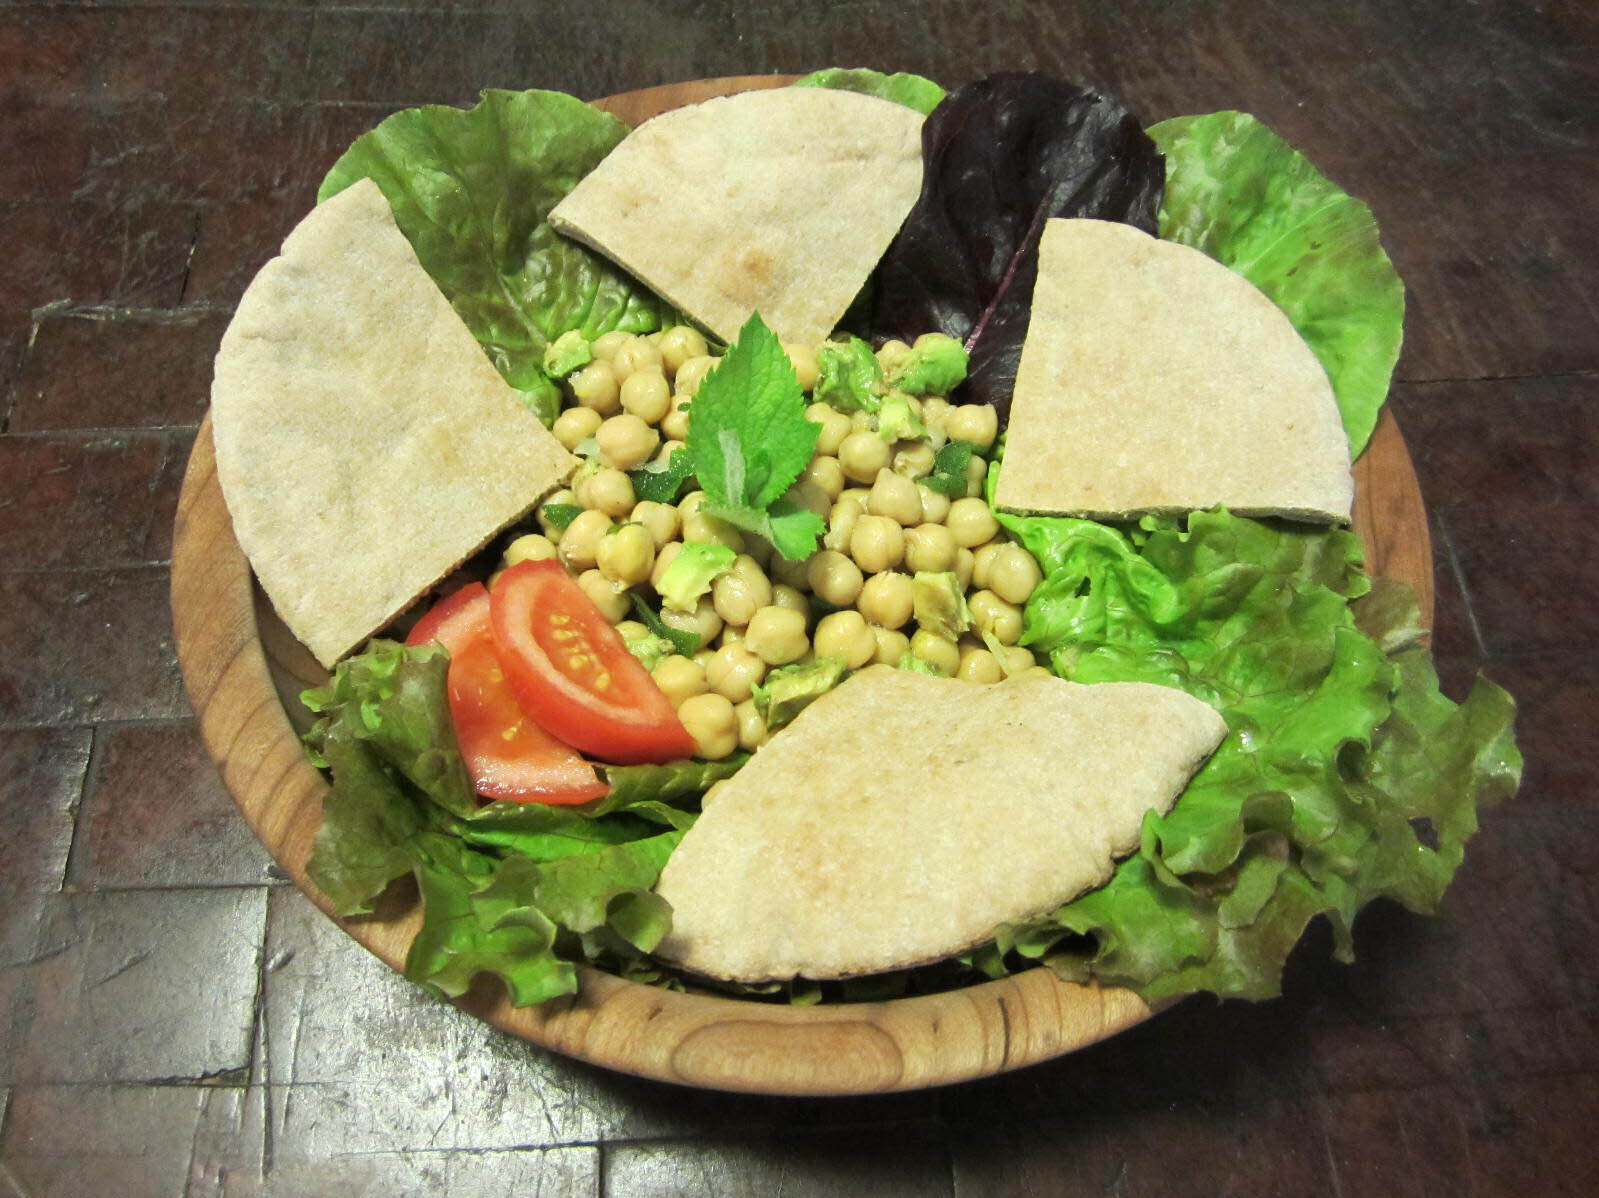 Bed of lettuce with chickpeas, sliced tomato, and pita bread